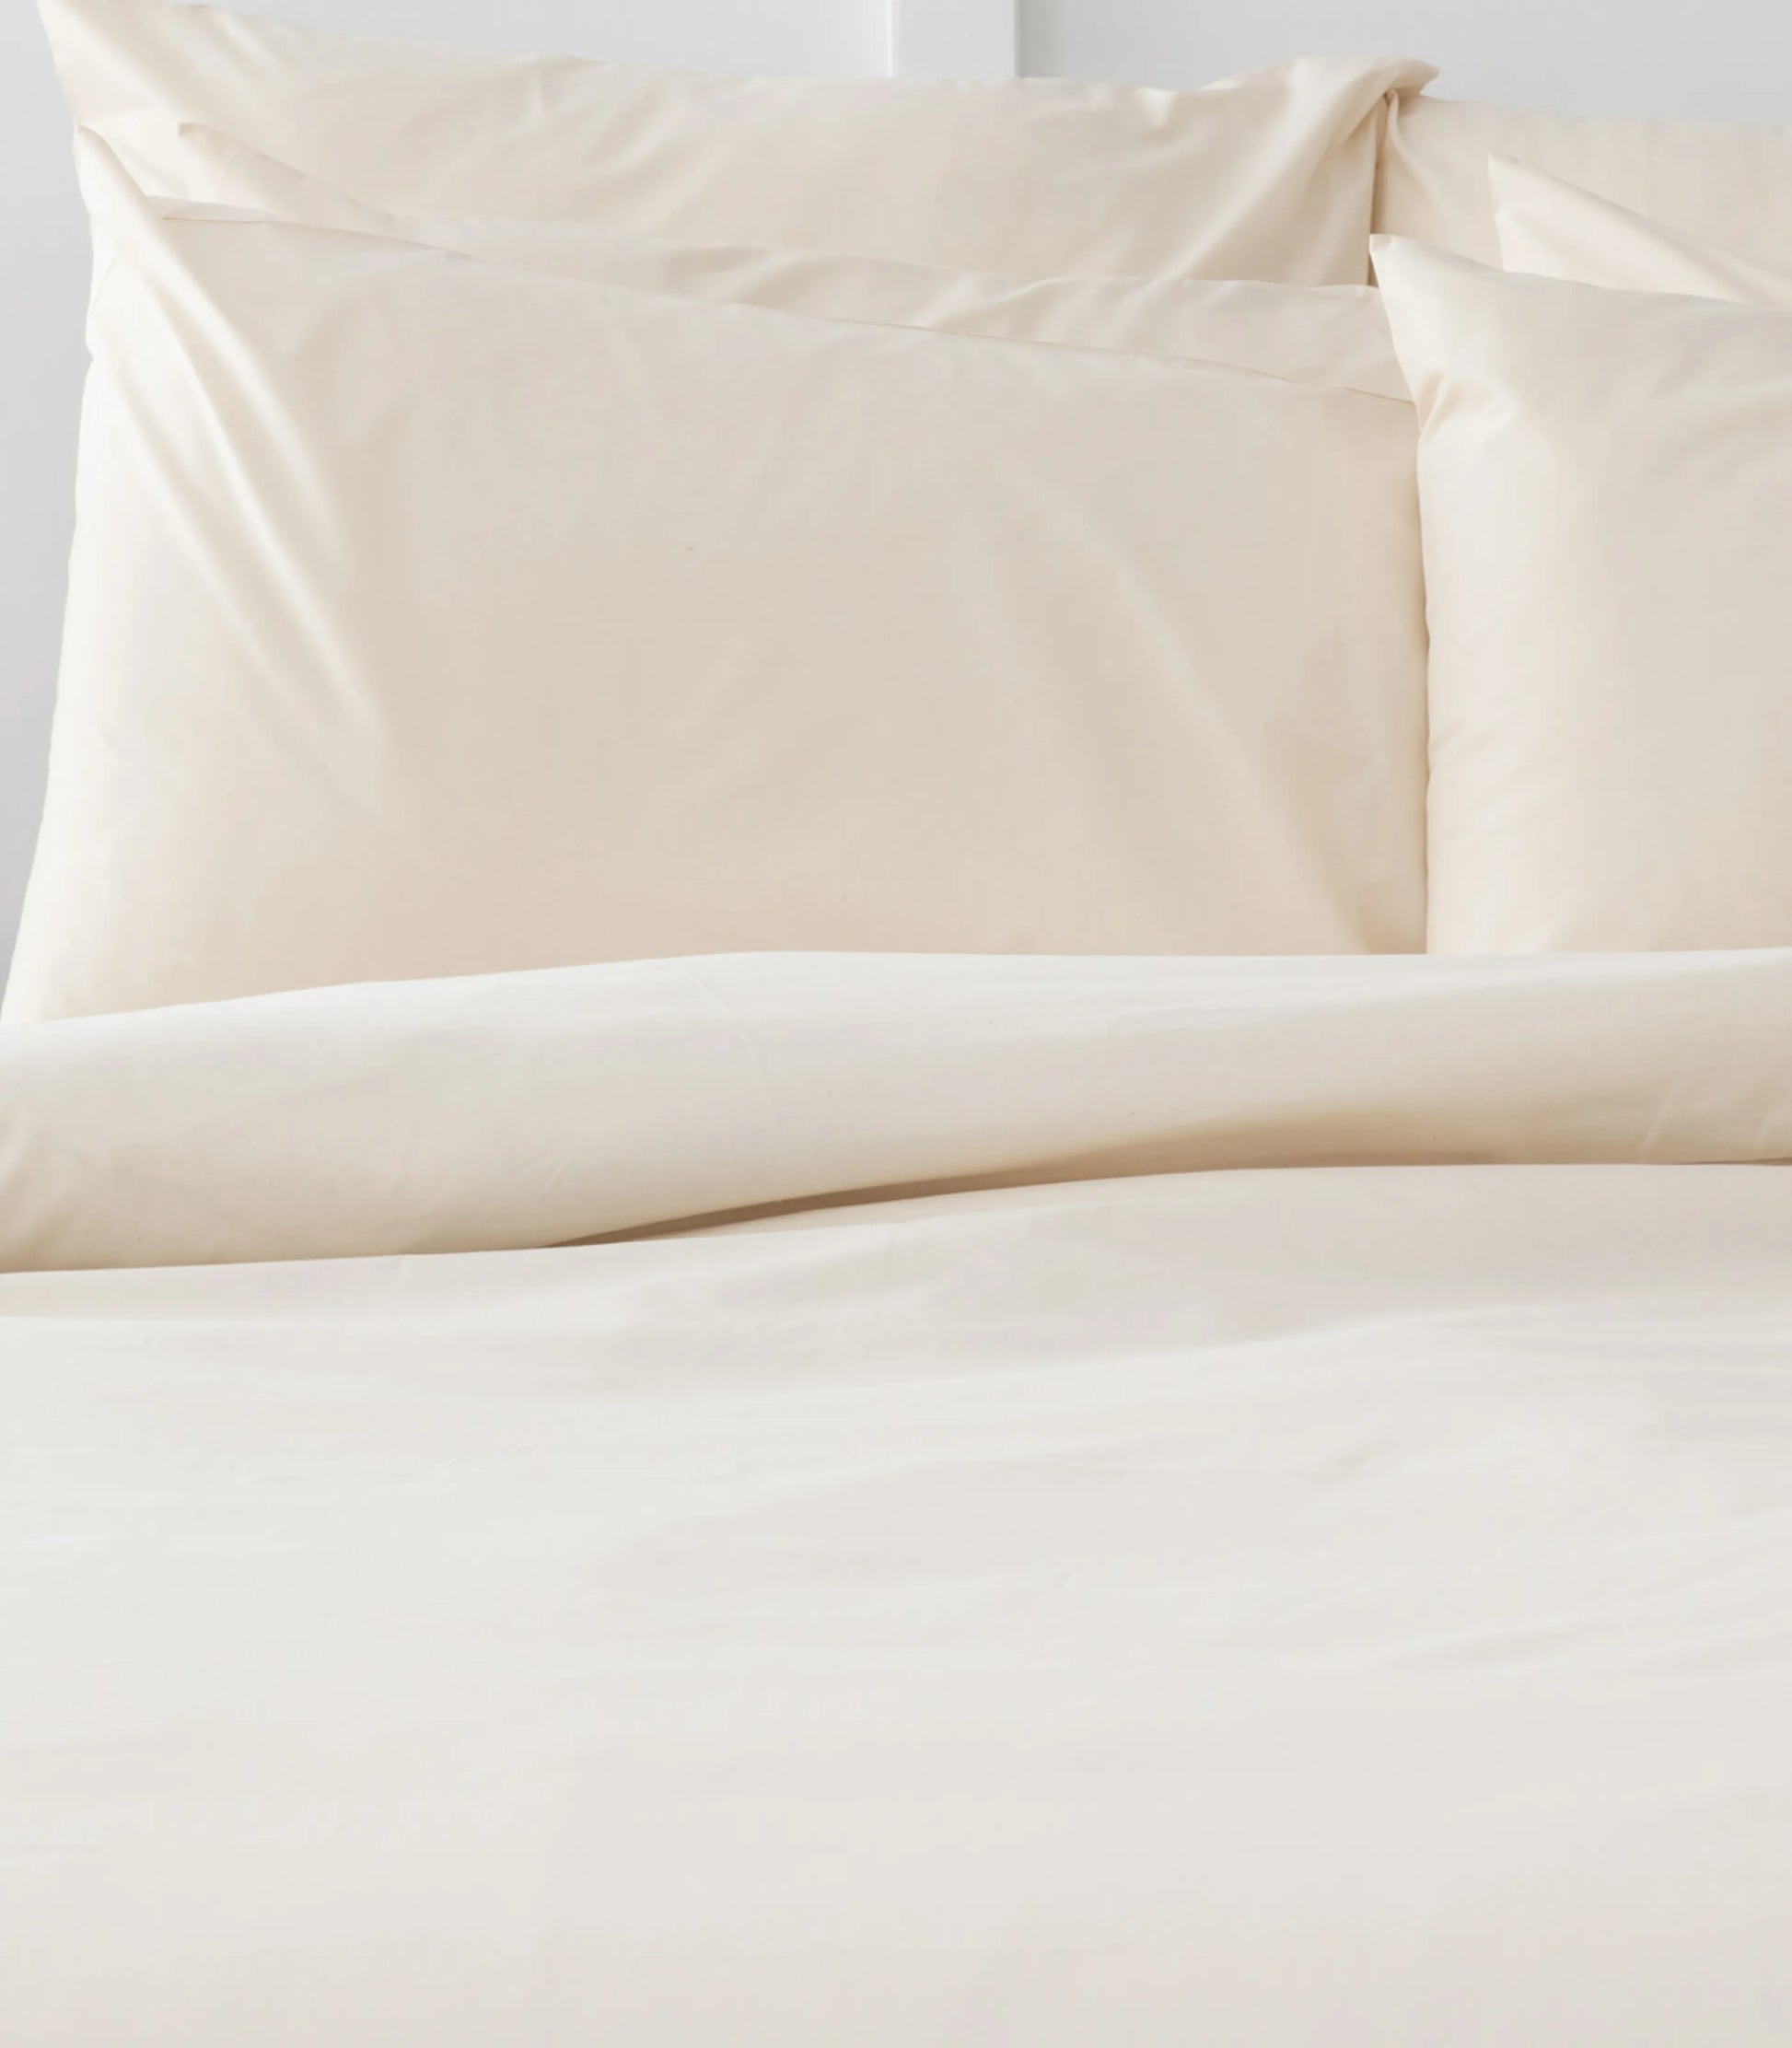 Bhumi Organic Cotton - Percale Plain Quilt Cover - Ivory